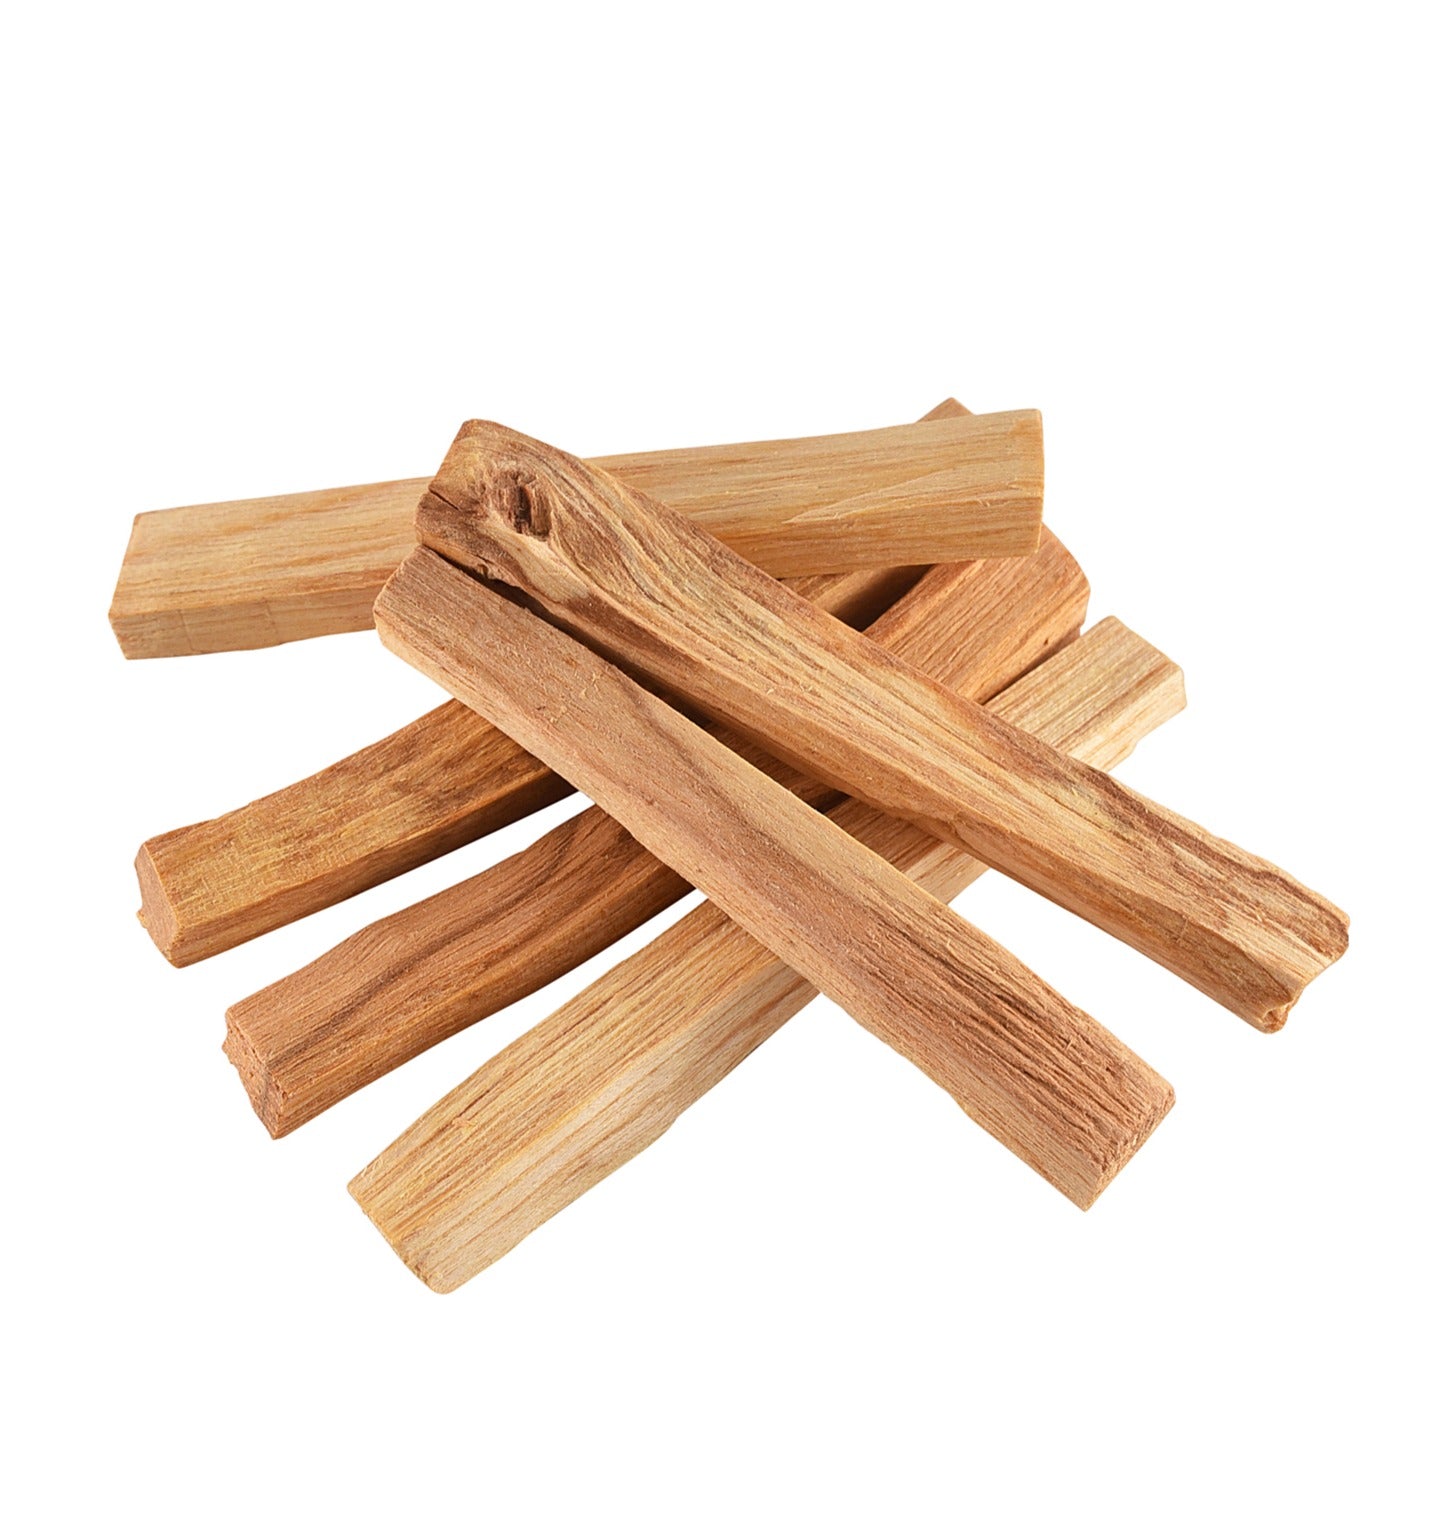 Palo Santo from Peru for Smudging